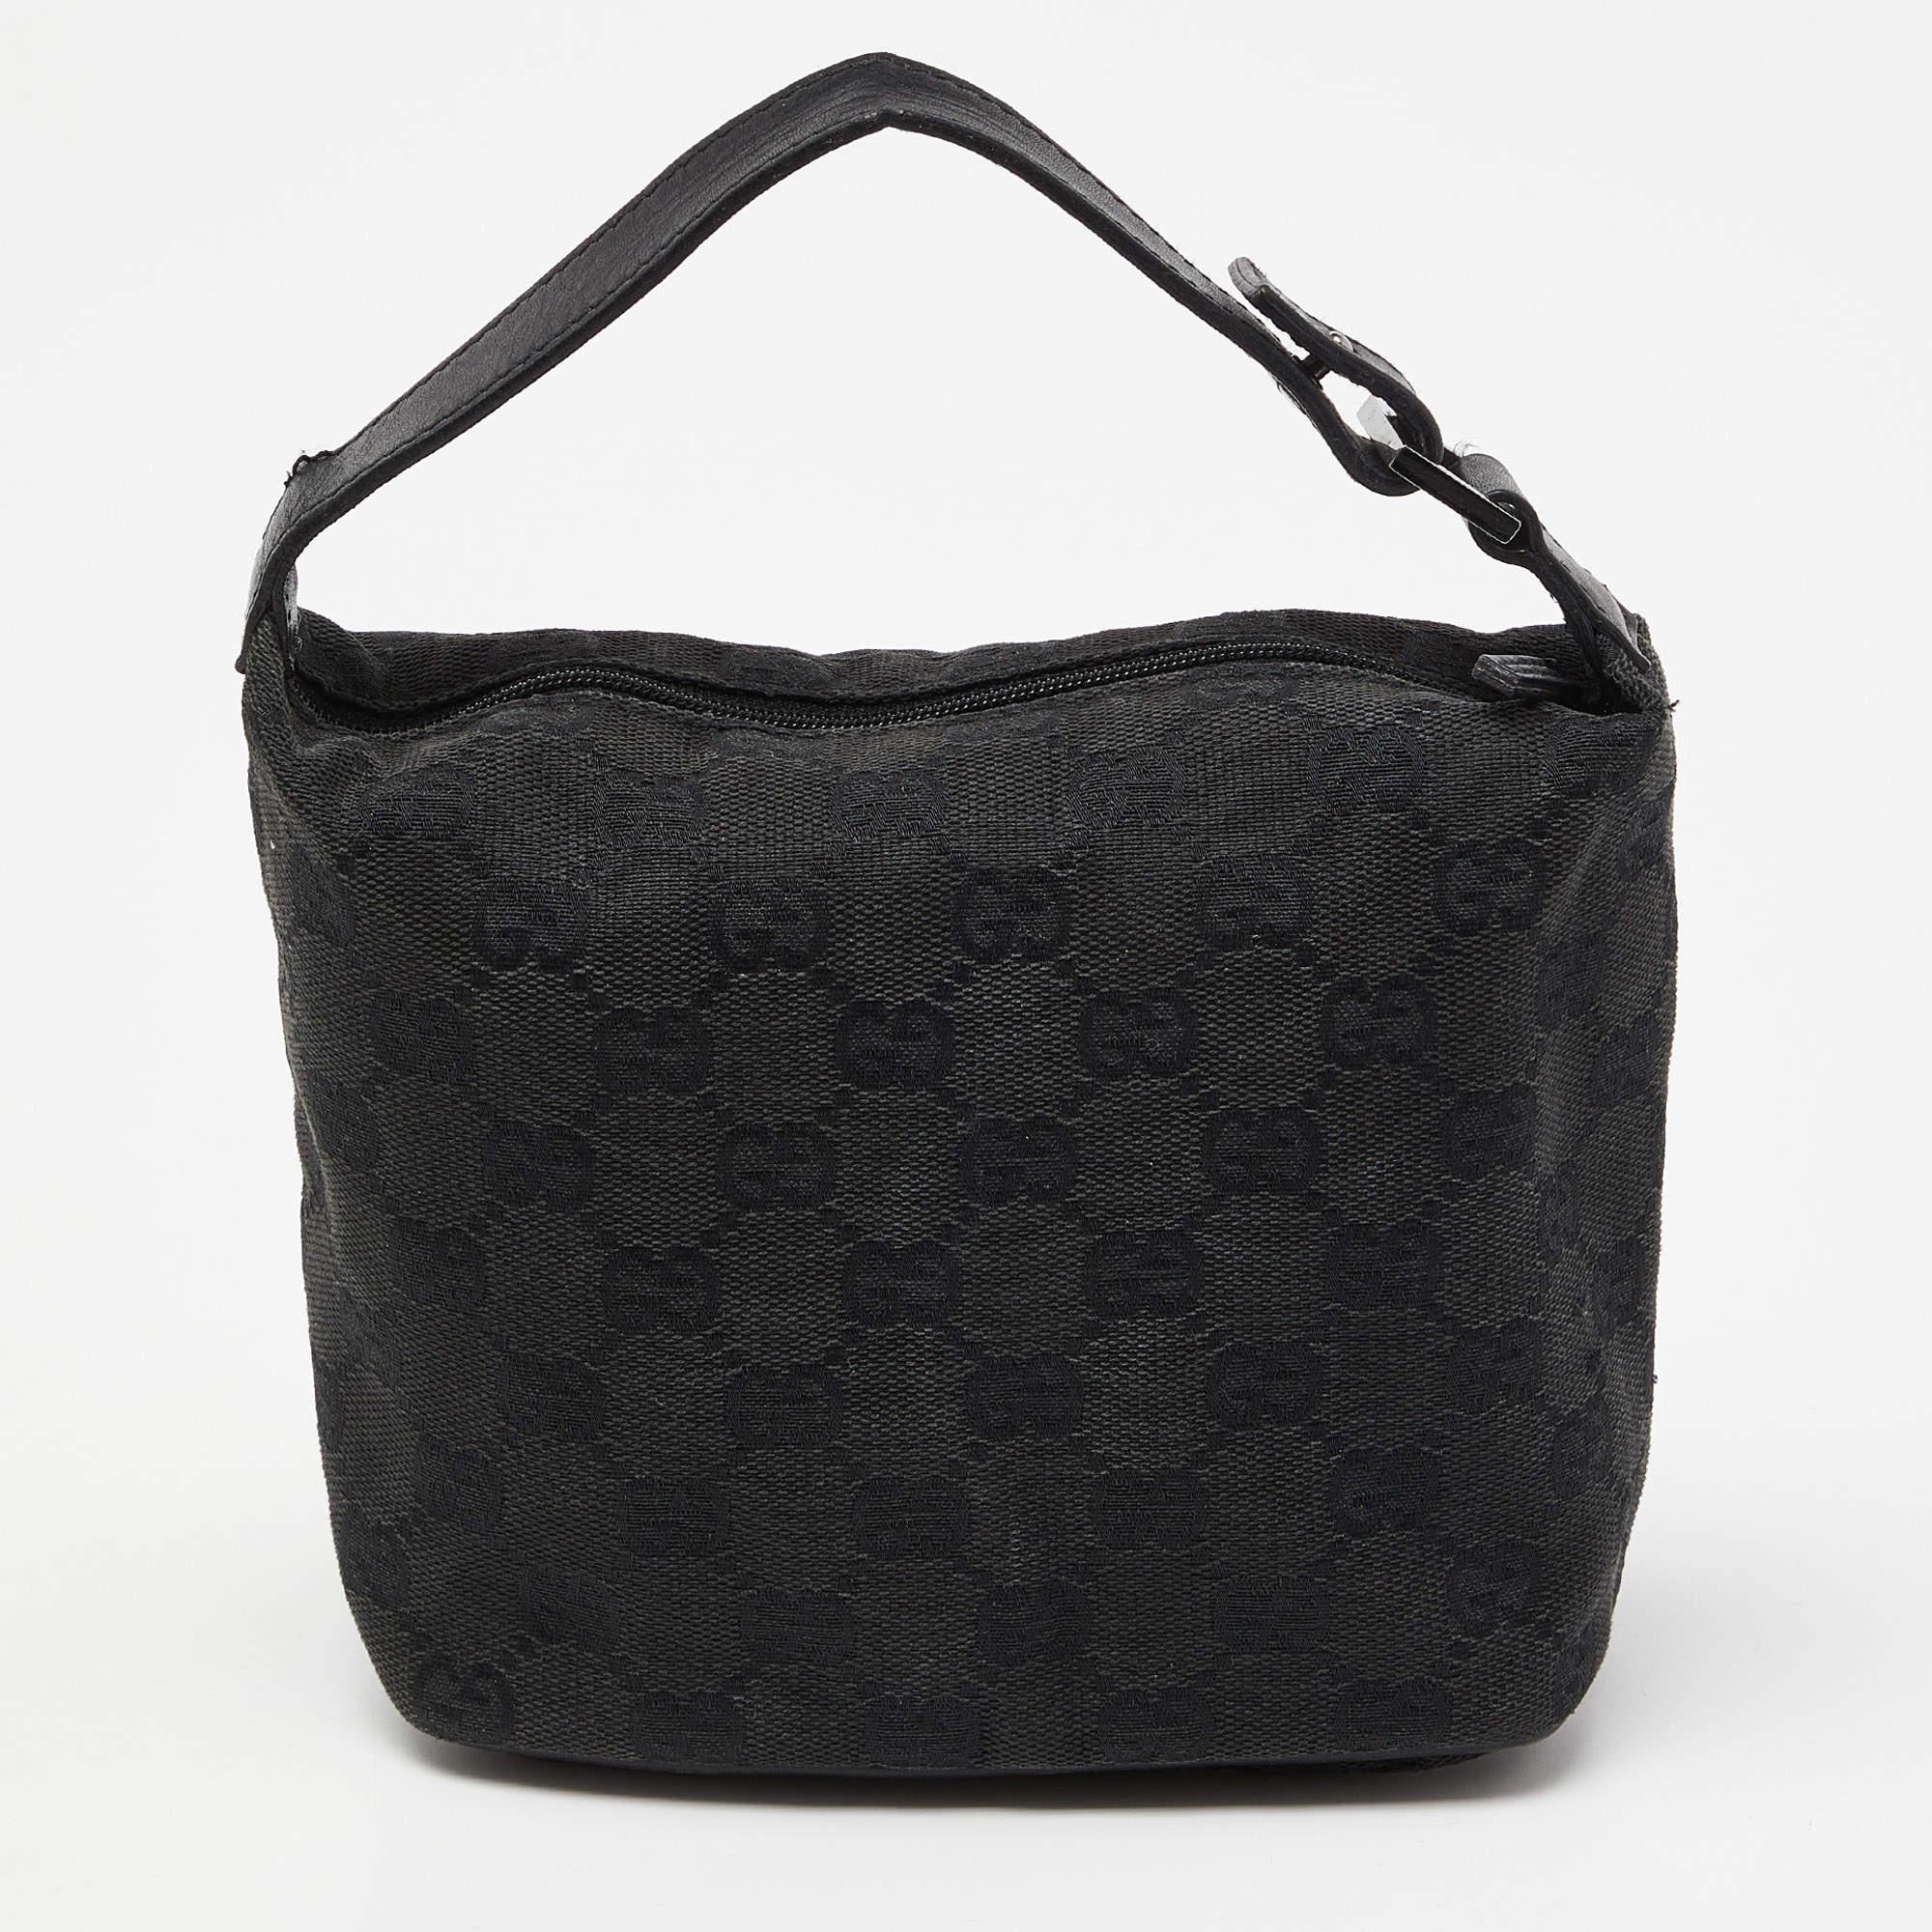 Introduce Gucci's timeless design aesthetic to your closet with the mini hobo. The Gucci hobo is crafted from GG canvas and is complete with a single handle.

